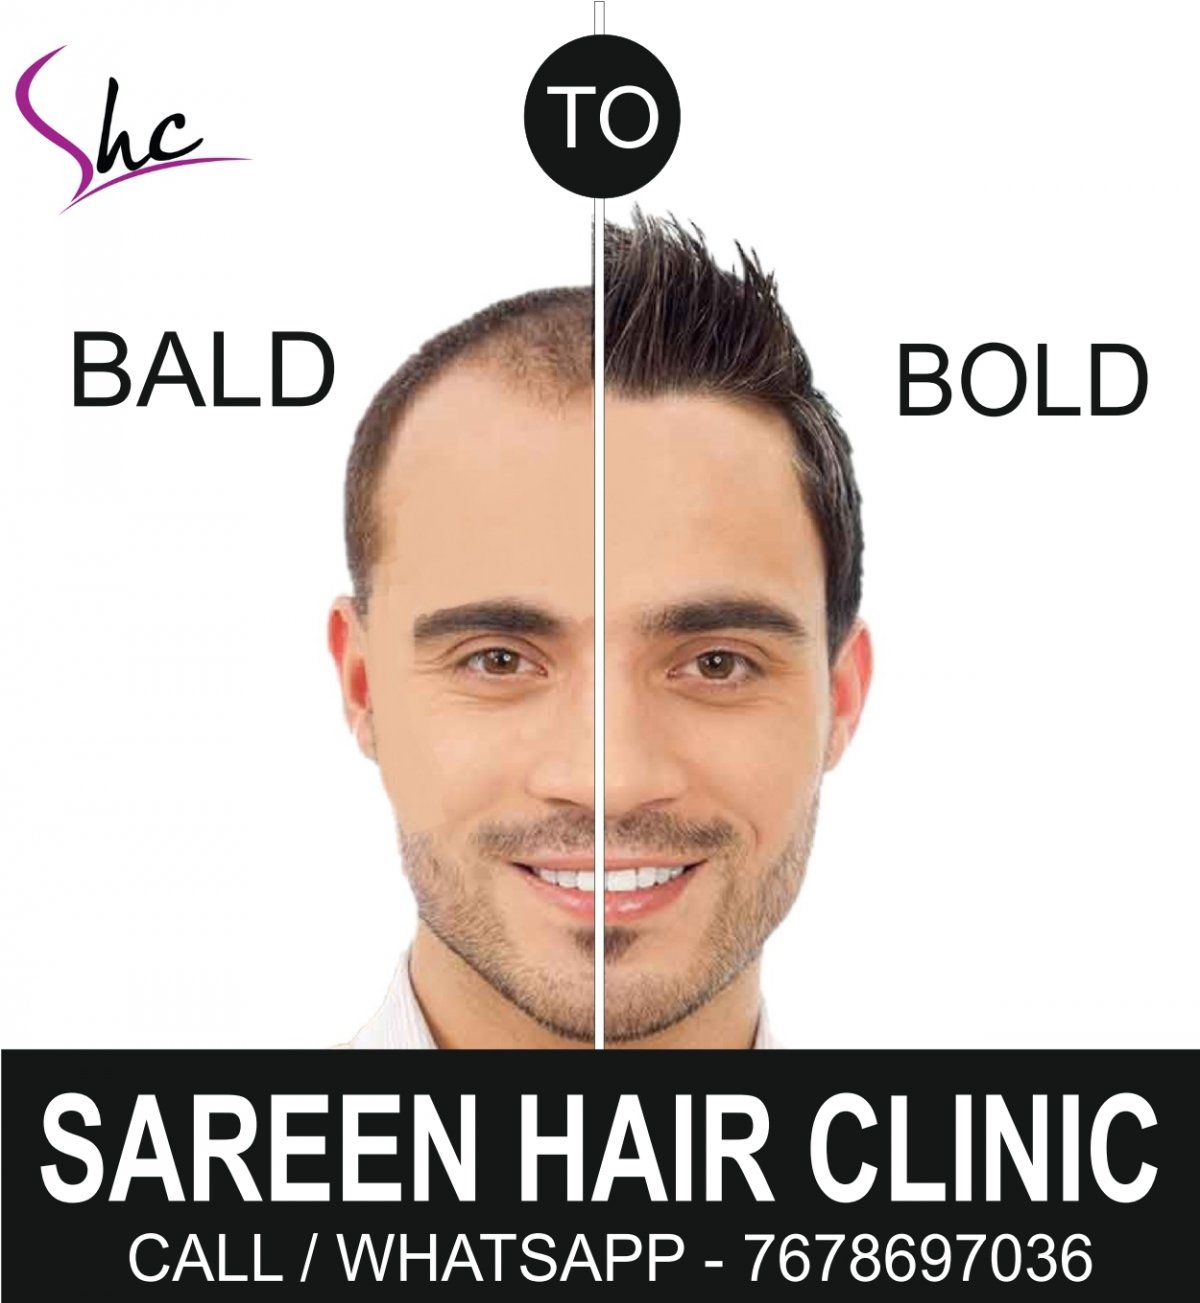 Tips For Taking Care of Your Hair After Hair Transplant by Sareen Hair  Clinic  Issuu